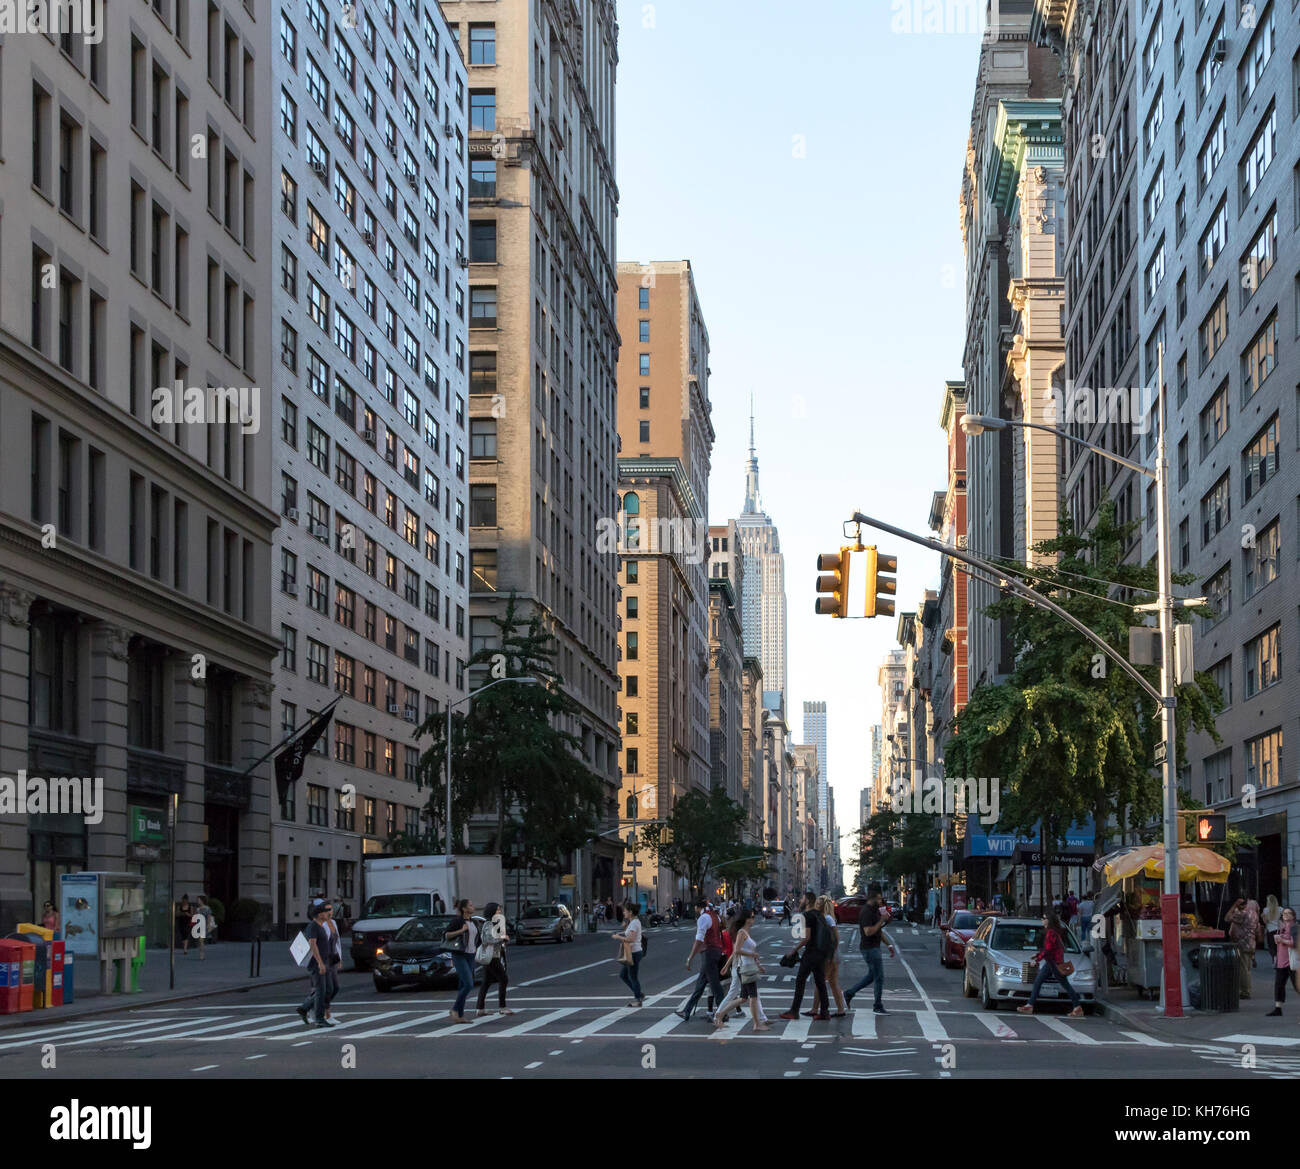 NEW YORK CITY - CIRCA 2017: People walk across a busy intersection on Fifth Avenue with the Empire State Building in the background skyline of Manhatt Stock Photo